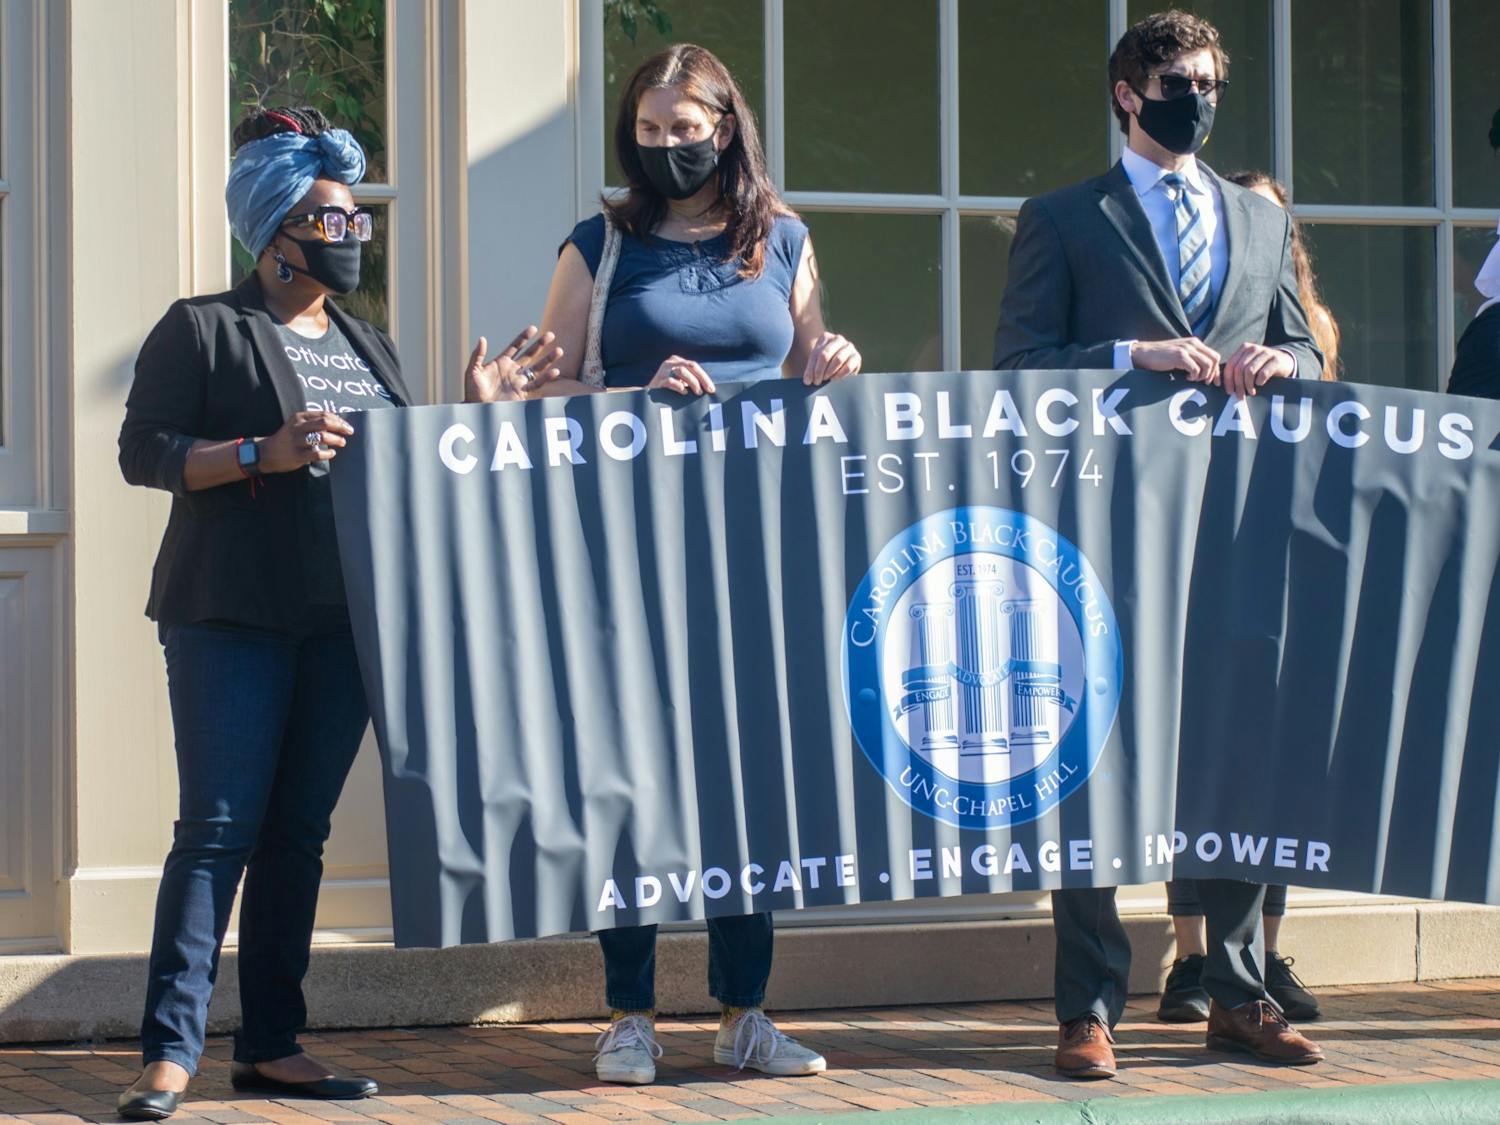 Members of the Carolina Black Caucus stand outside of the Carolina Inn to protest the UNC decision to deny tenure to Nikole Hannah-Jones on Thursday May 20, 2021 before the UNC Board of Trustees meeting.